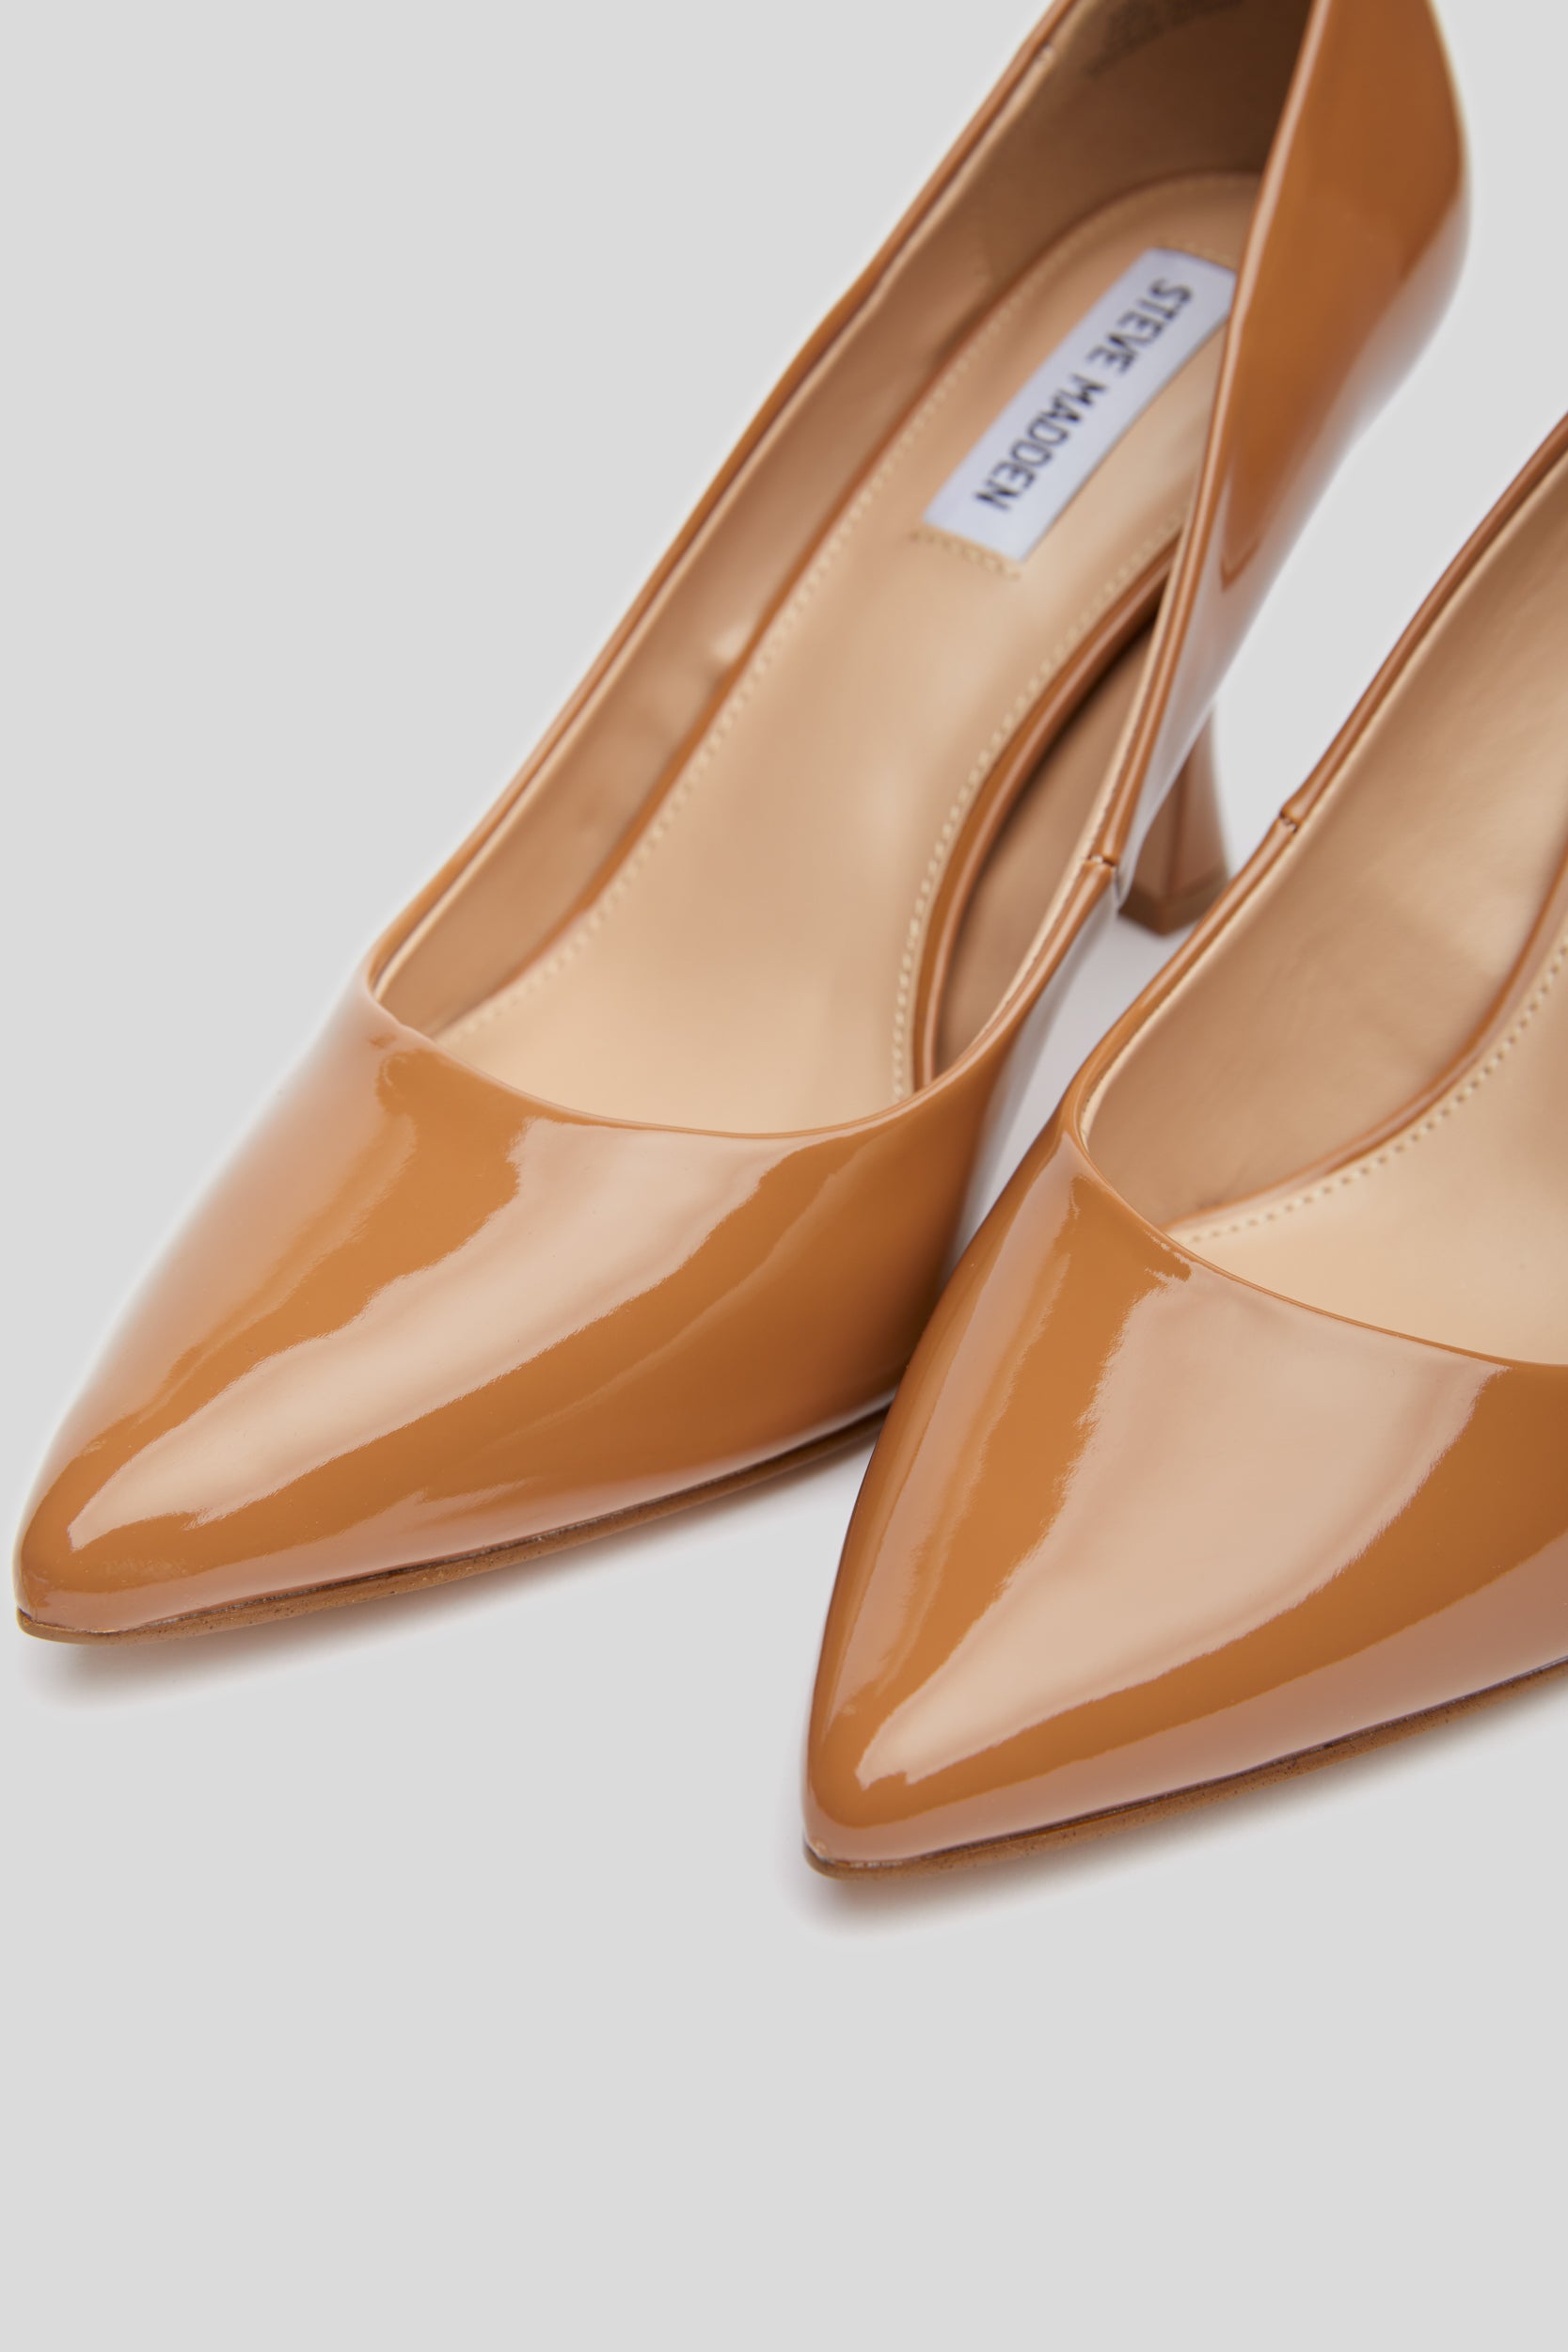 STEVE MADDEN "Notary" Décolleté in Camel Patent